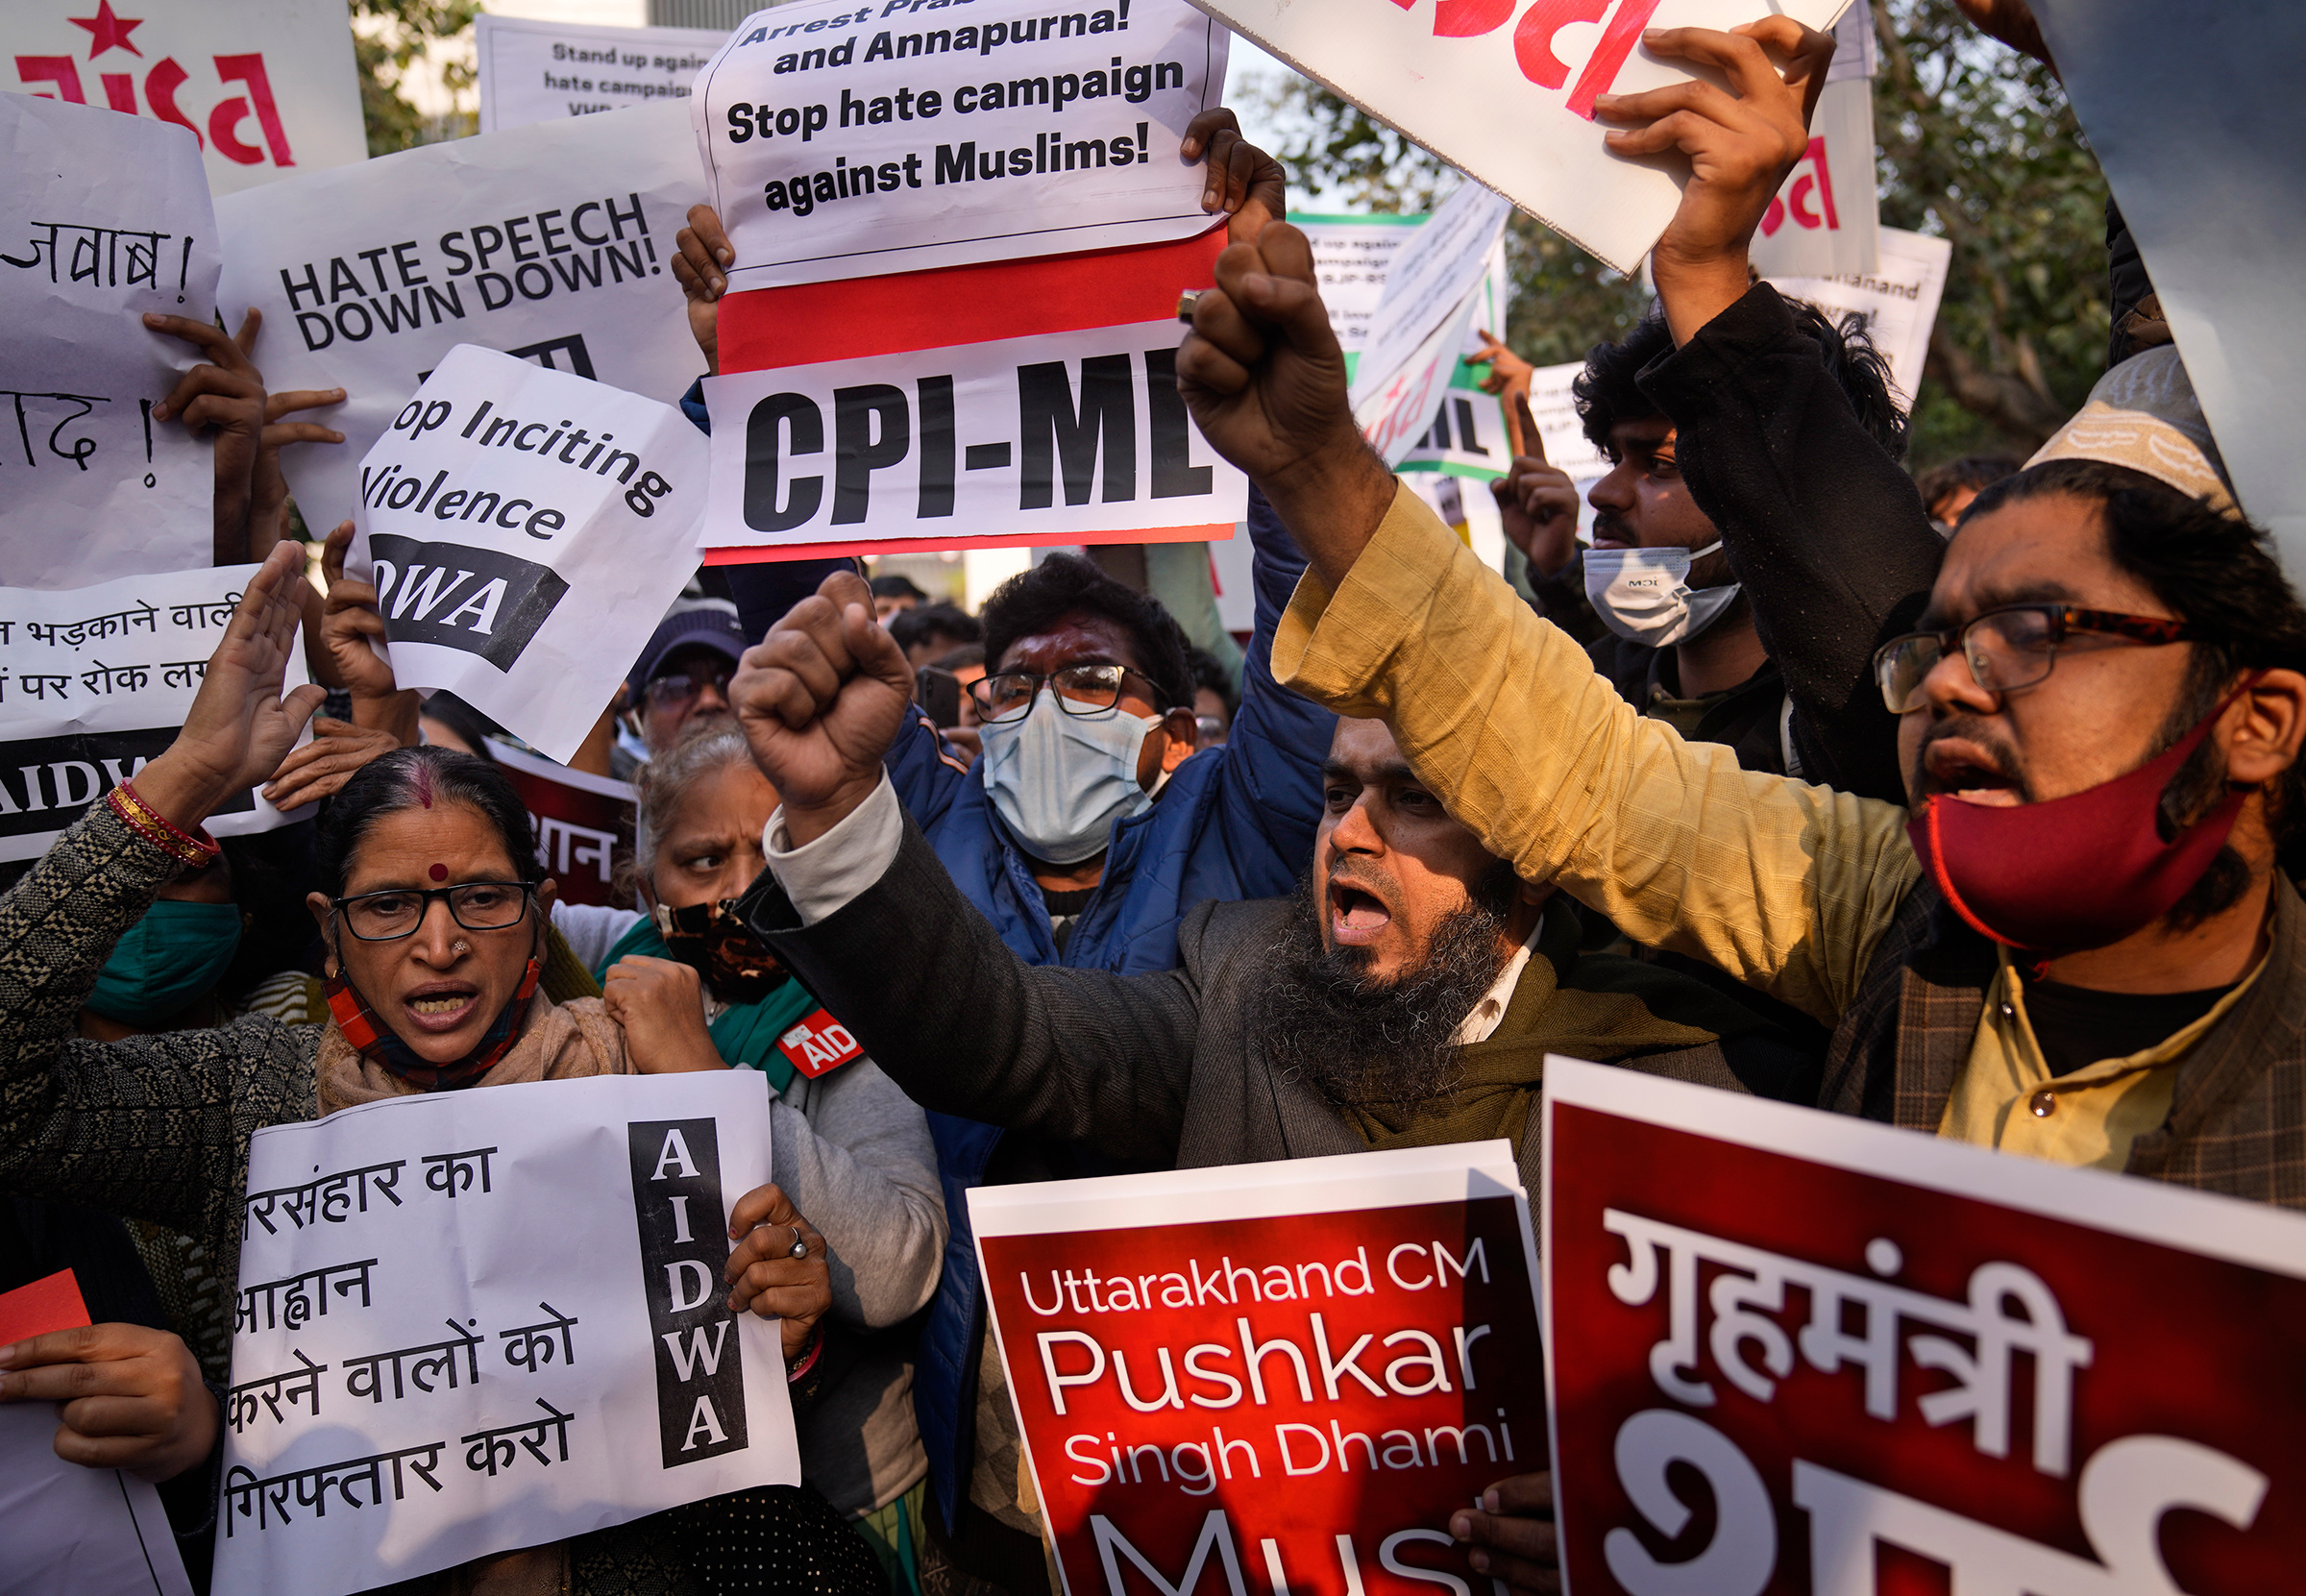 Demonstrators shout slogans during a protest against hate speech in New Delhi on Dec. 27, in reaction to a recent event at Haridwar, northern Uttarakhand where some leaders made communally sensitive speeches at a religious gathering (Manish Swarup—AP)